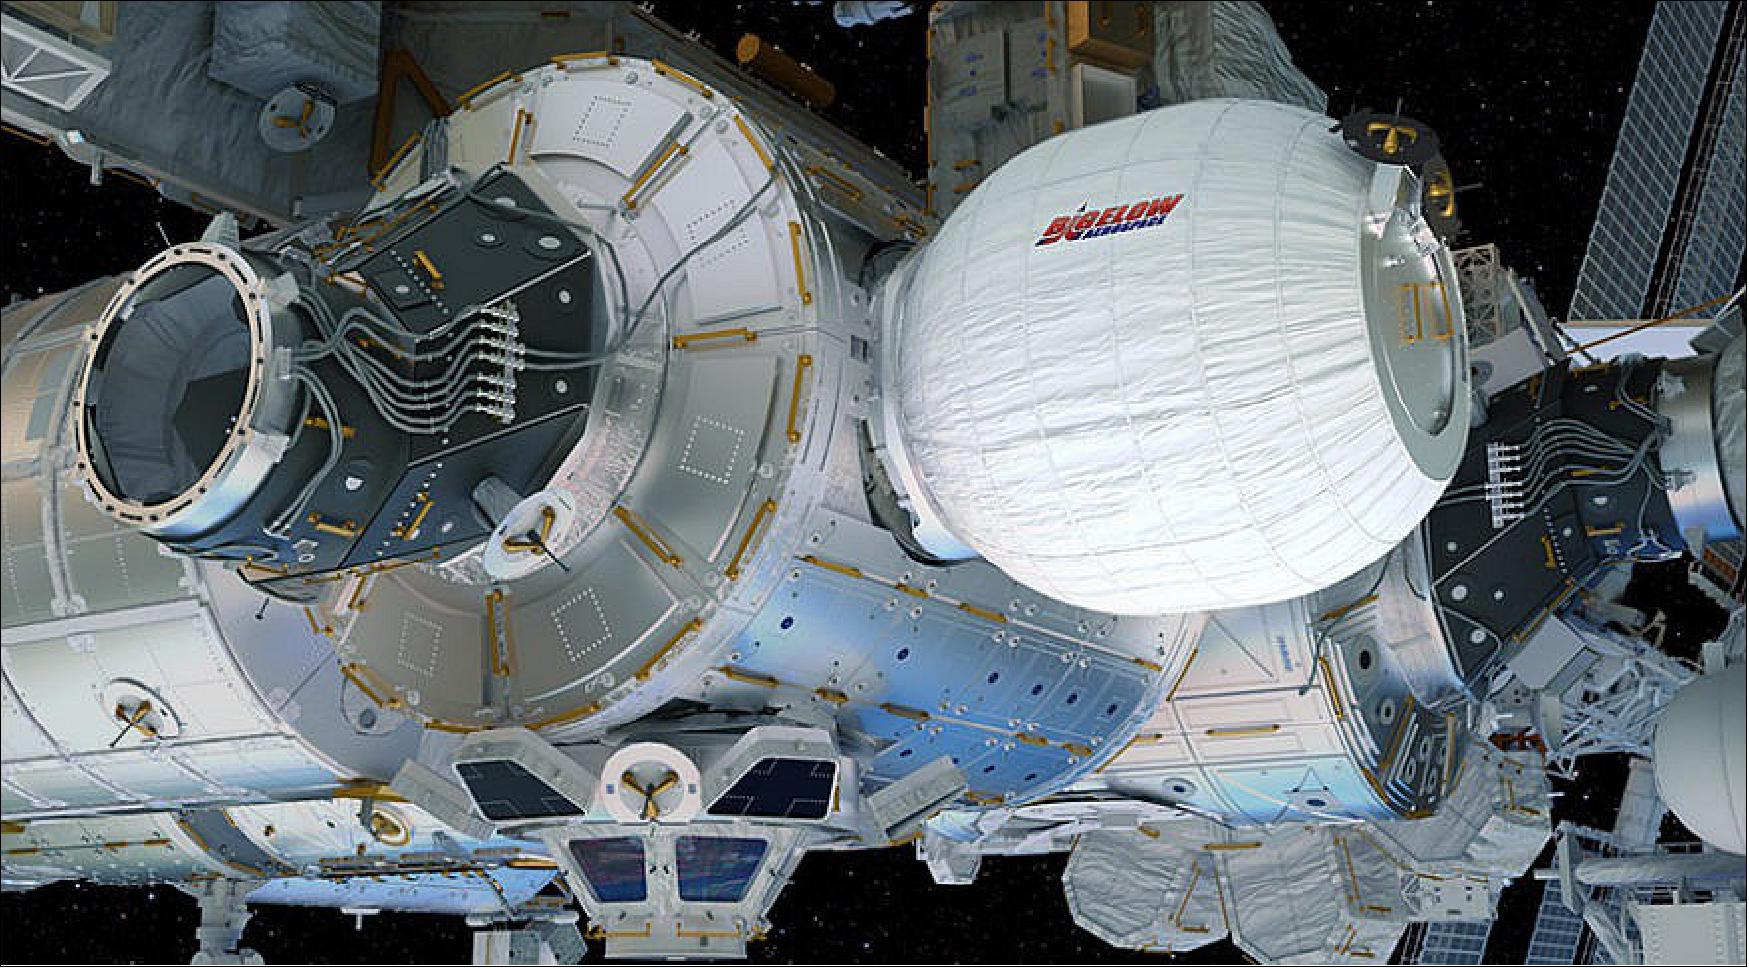 Figure 5: NASA took ownership of the BEAM inflatable module on the ISS from Bigelow Aerospace when Bigelow's engineering contract with NASA expired in December (image credit: NASA/Bigelow)